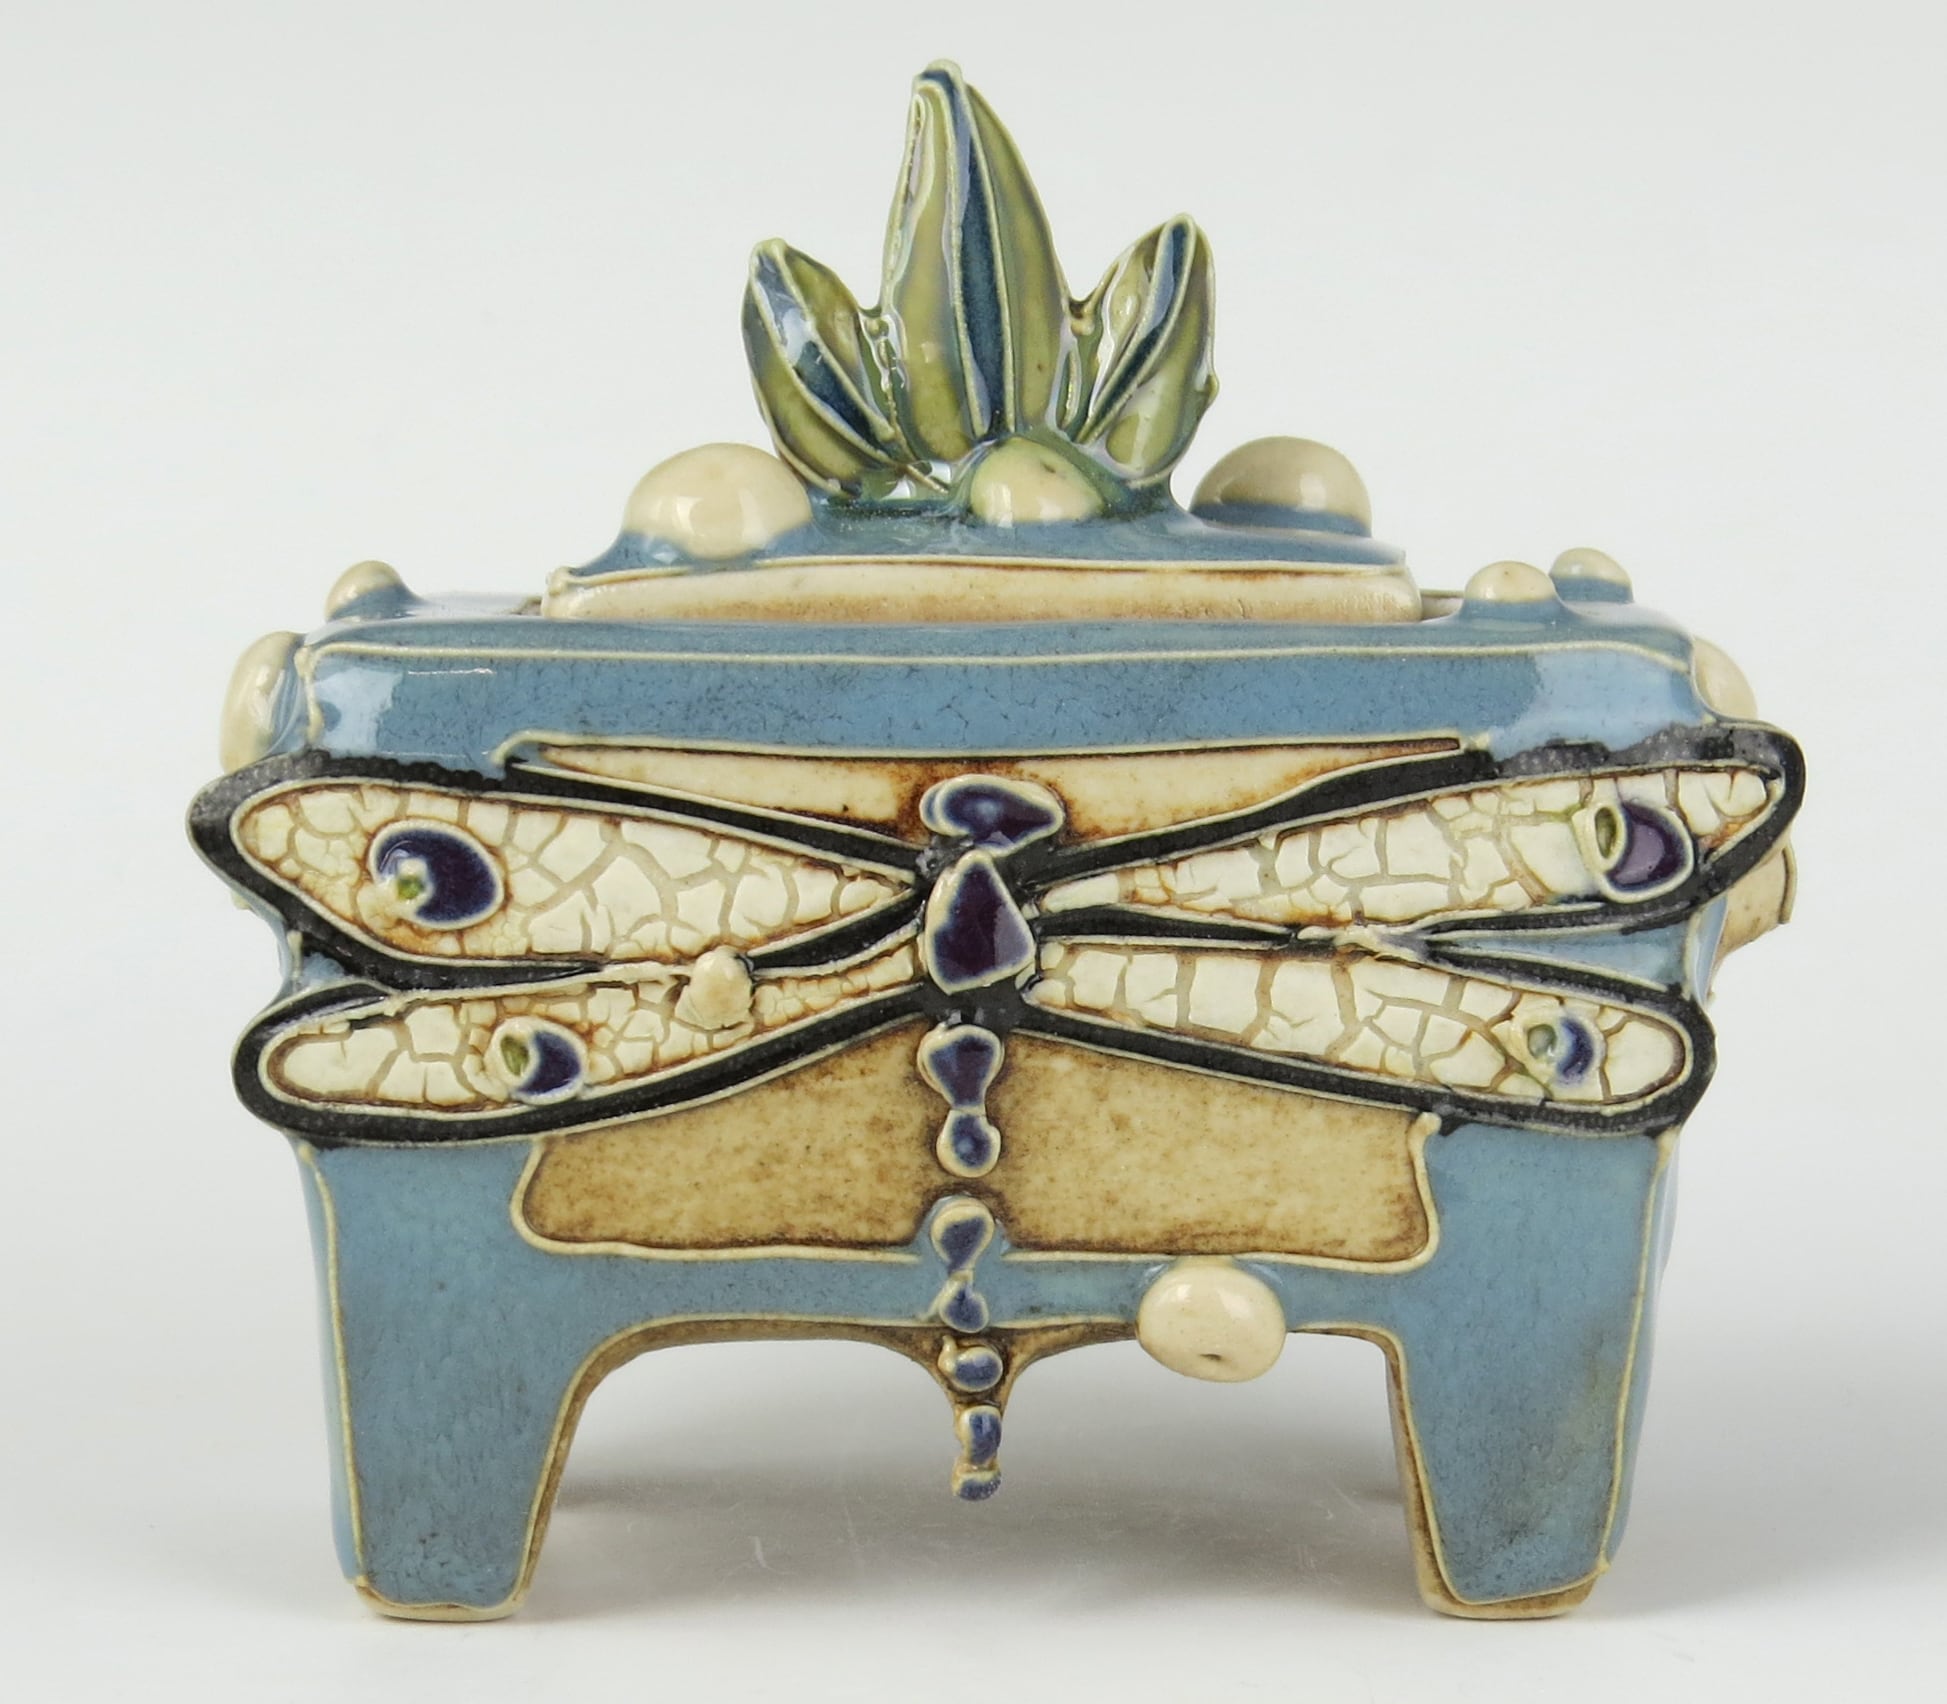 a dragonfly with mosaic wings adorns a ceramic box-like work with green leaves at the top